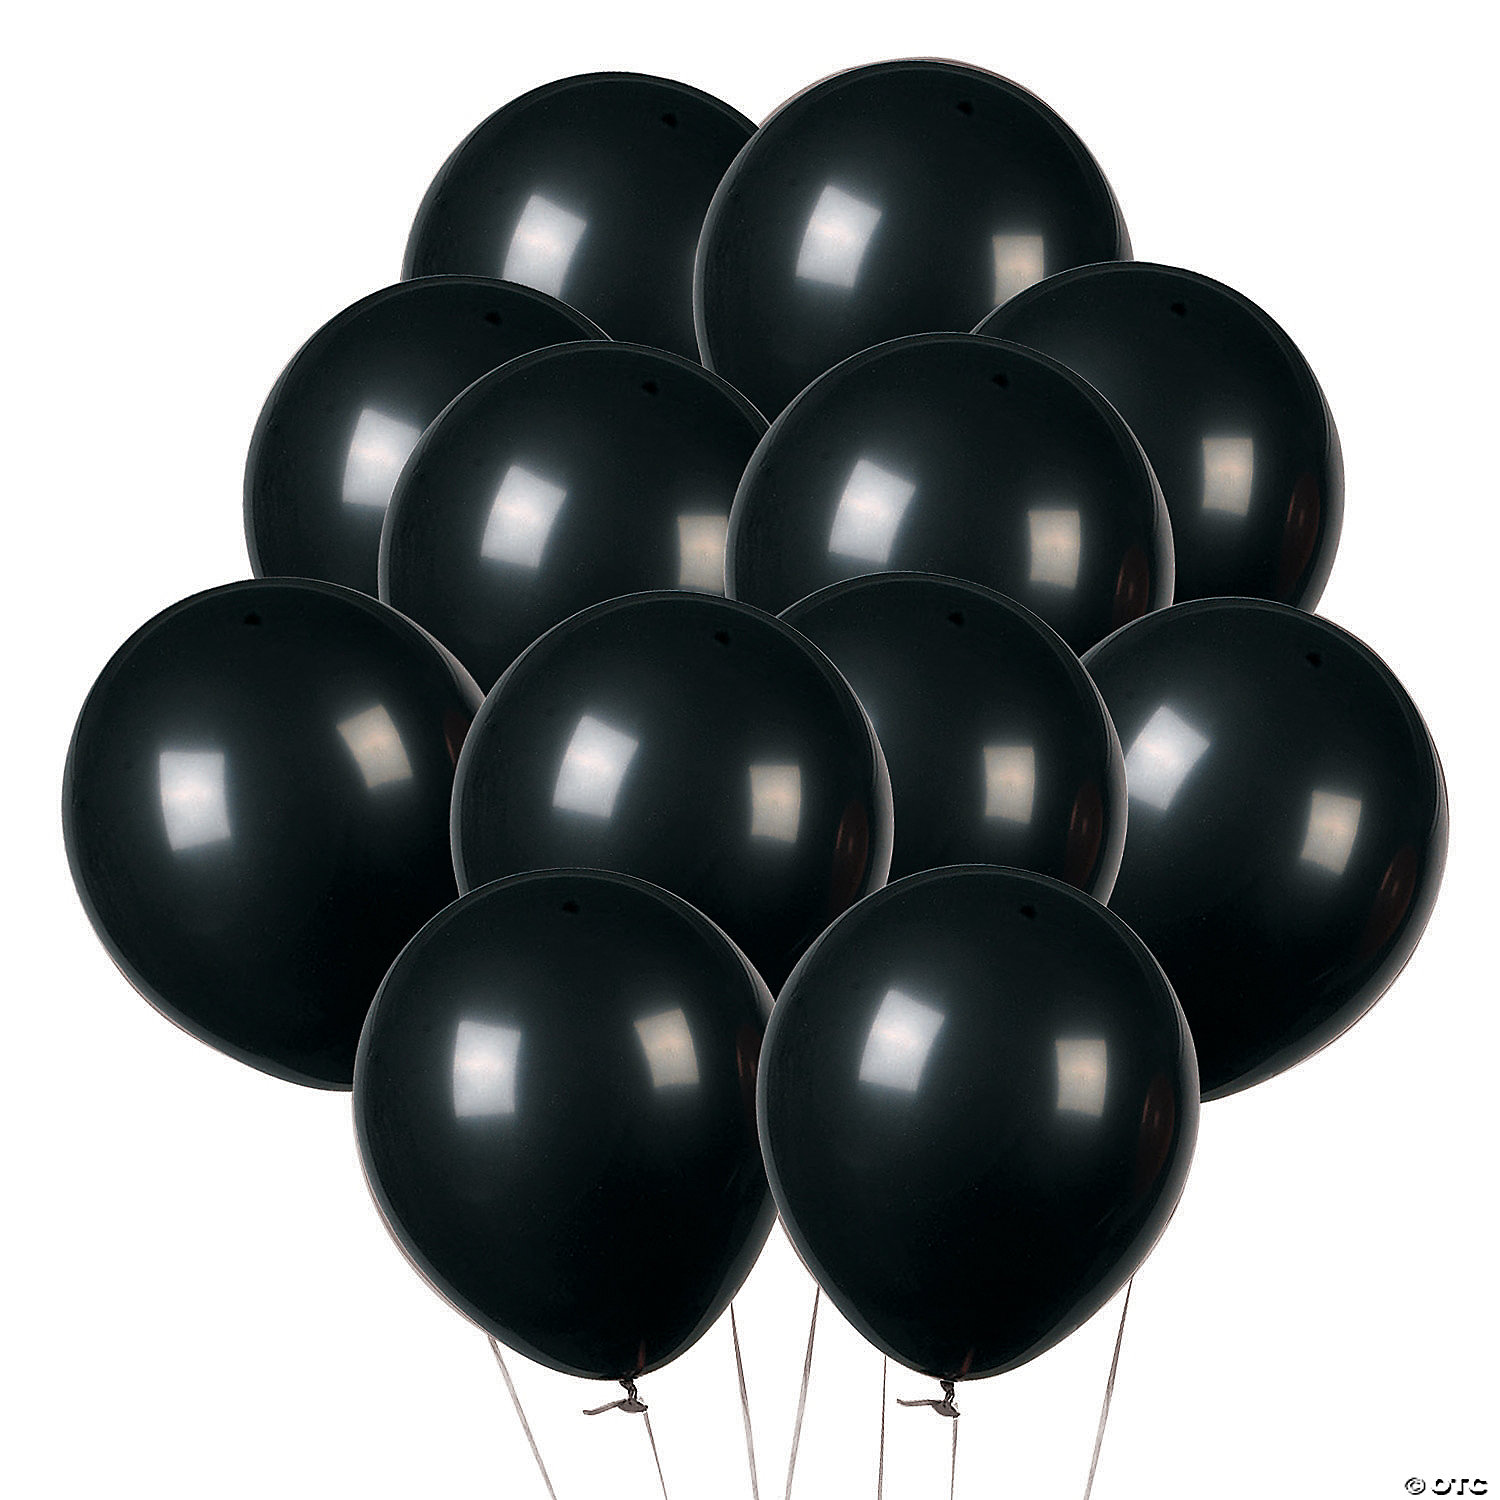 10" inch Party Balloons Metallic/ Pearl Baloons Celebration All occasions ballon 